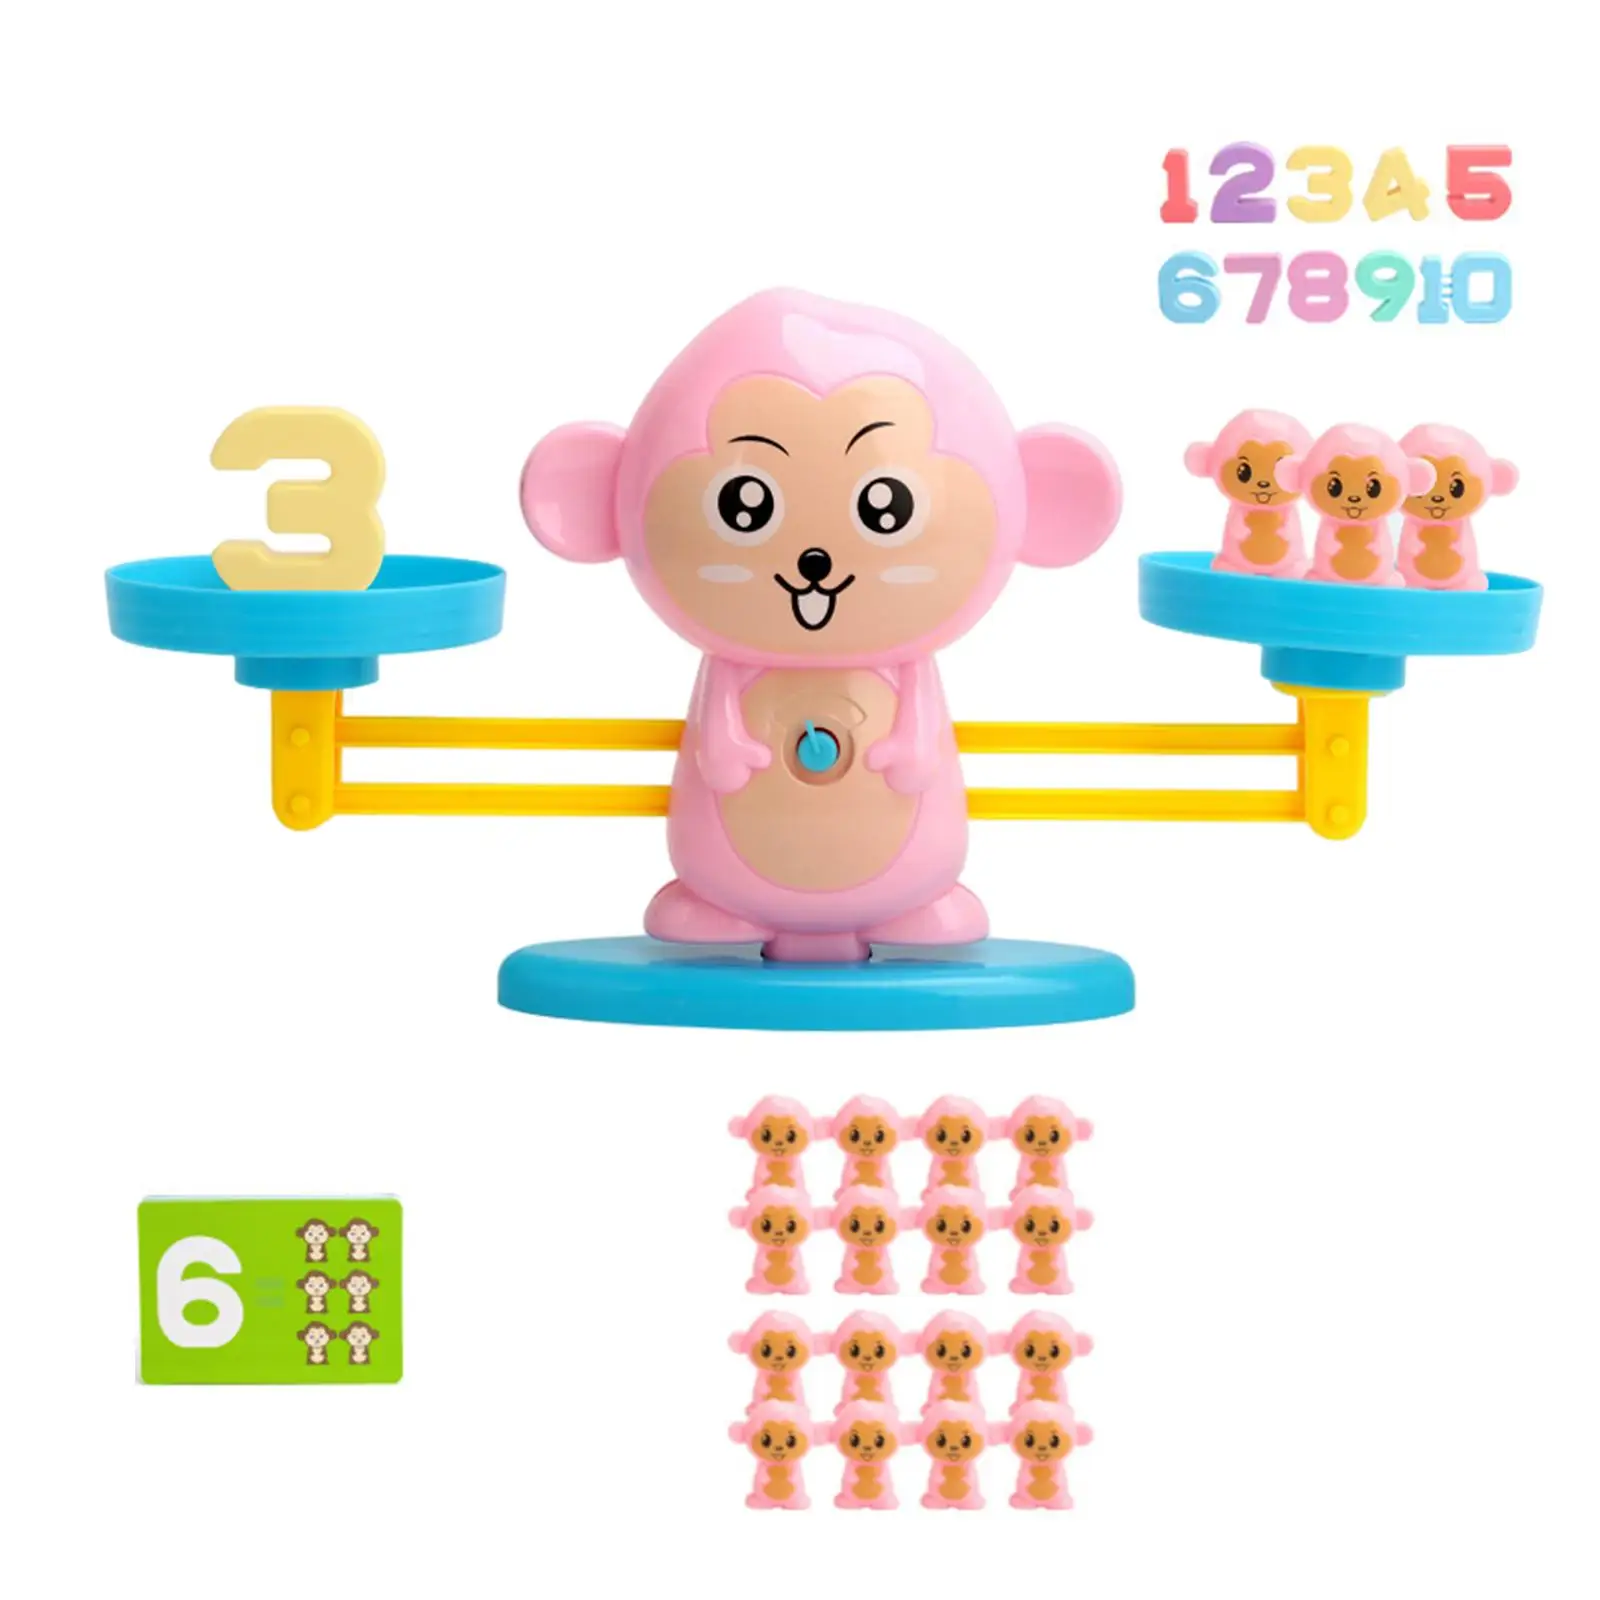 Balance Math Game Balance Scales Children`s Birthday Gifts Balance Game Toy Balance Counting Toys Children 3 4 5 Year Olds Kids